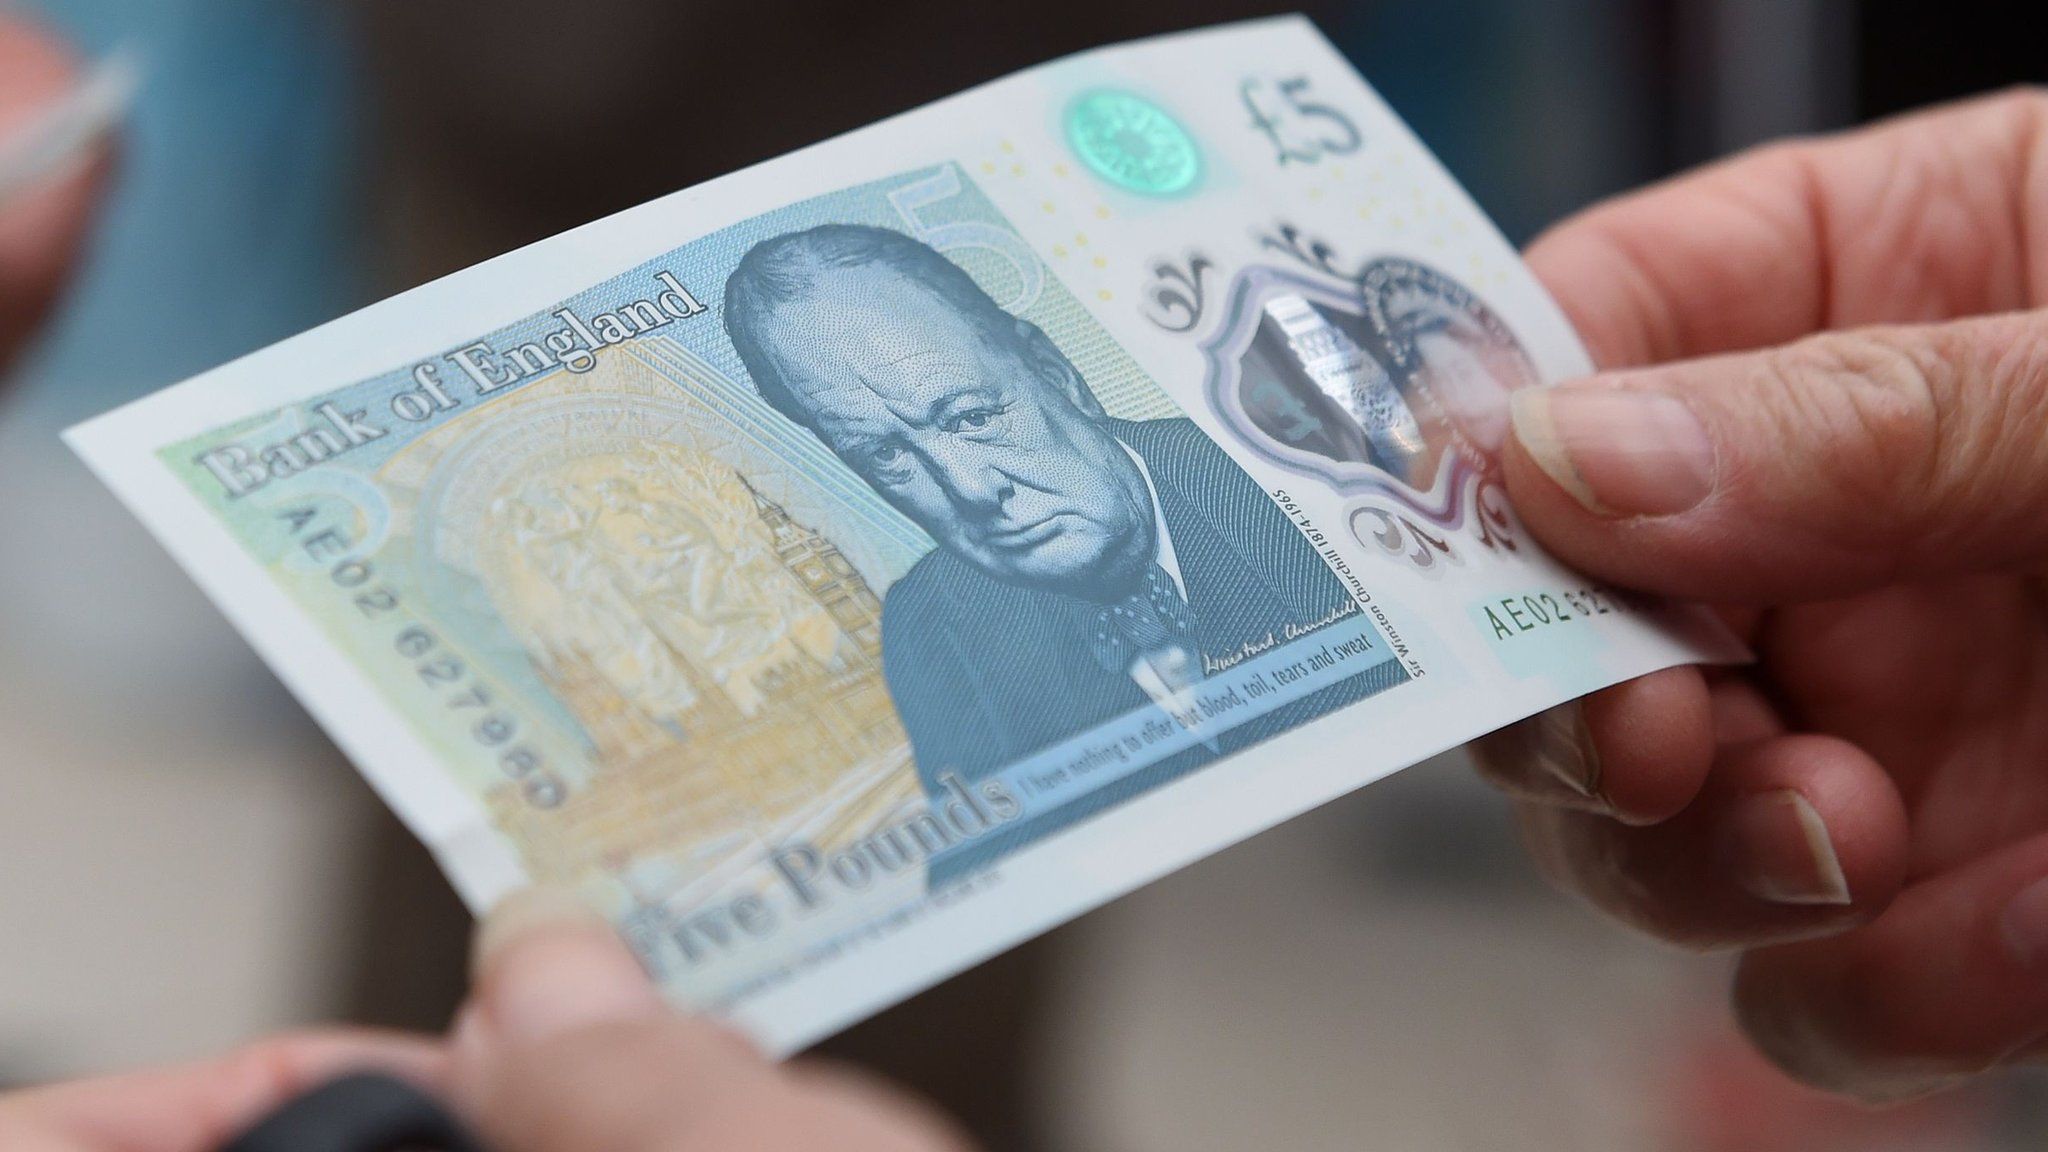 Image of new Bank of England £5 note